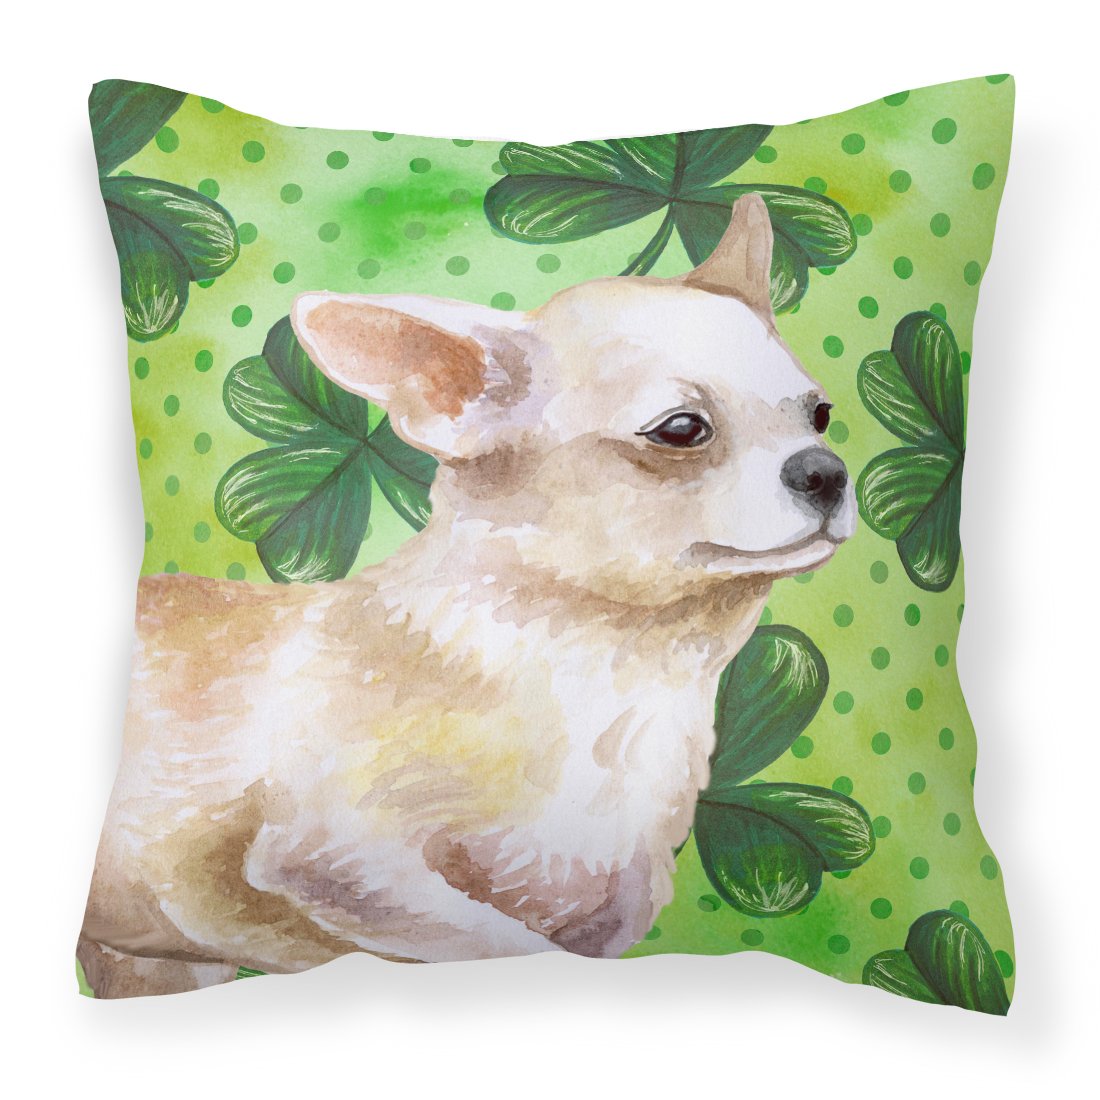 Chihuahua Leg up St Patrick's Fabric Decorative Pillow BB9871PW1818 by Caroline's Treasures